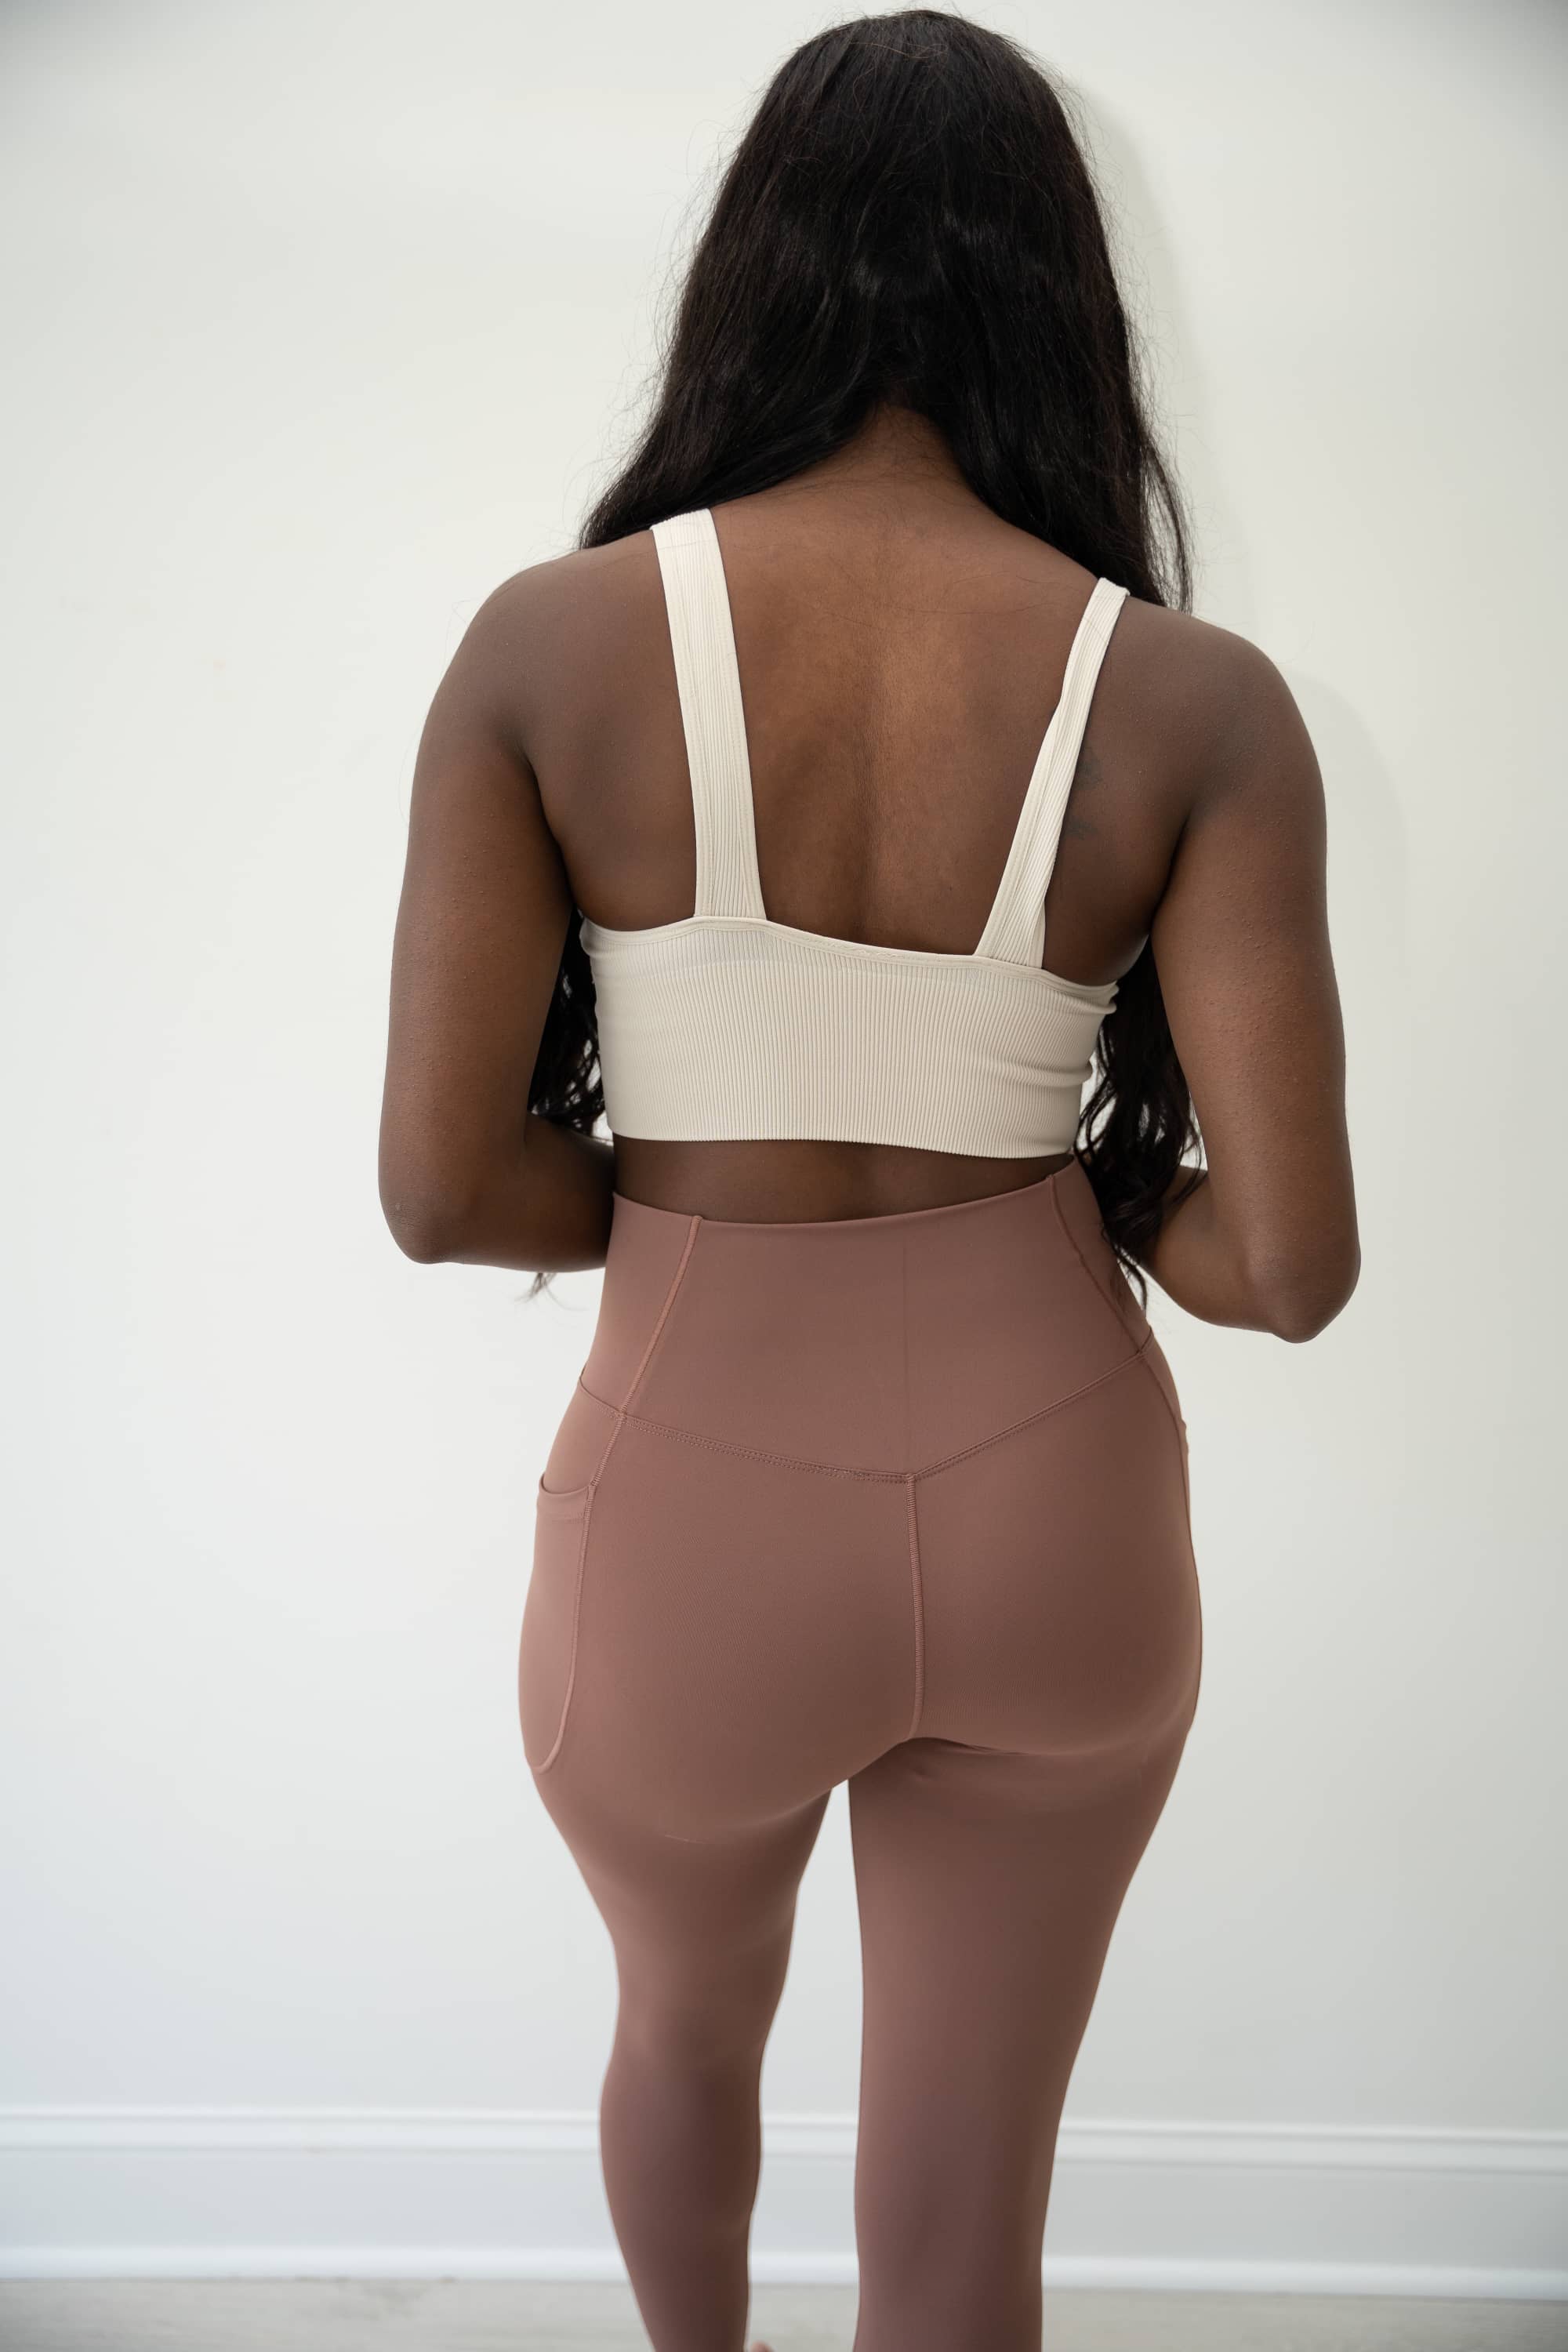 BLUSH seamless push-up bralette with padded cups in Cream